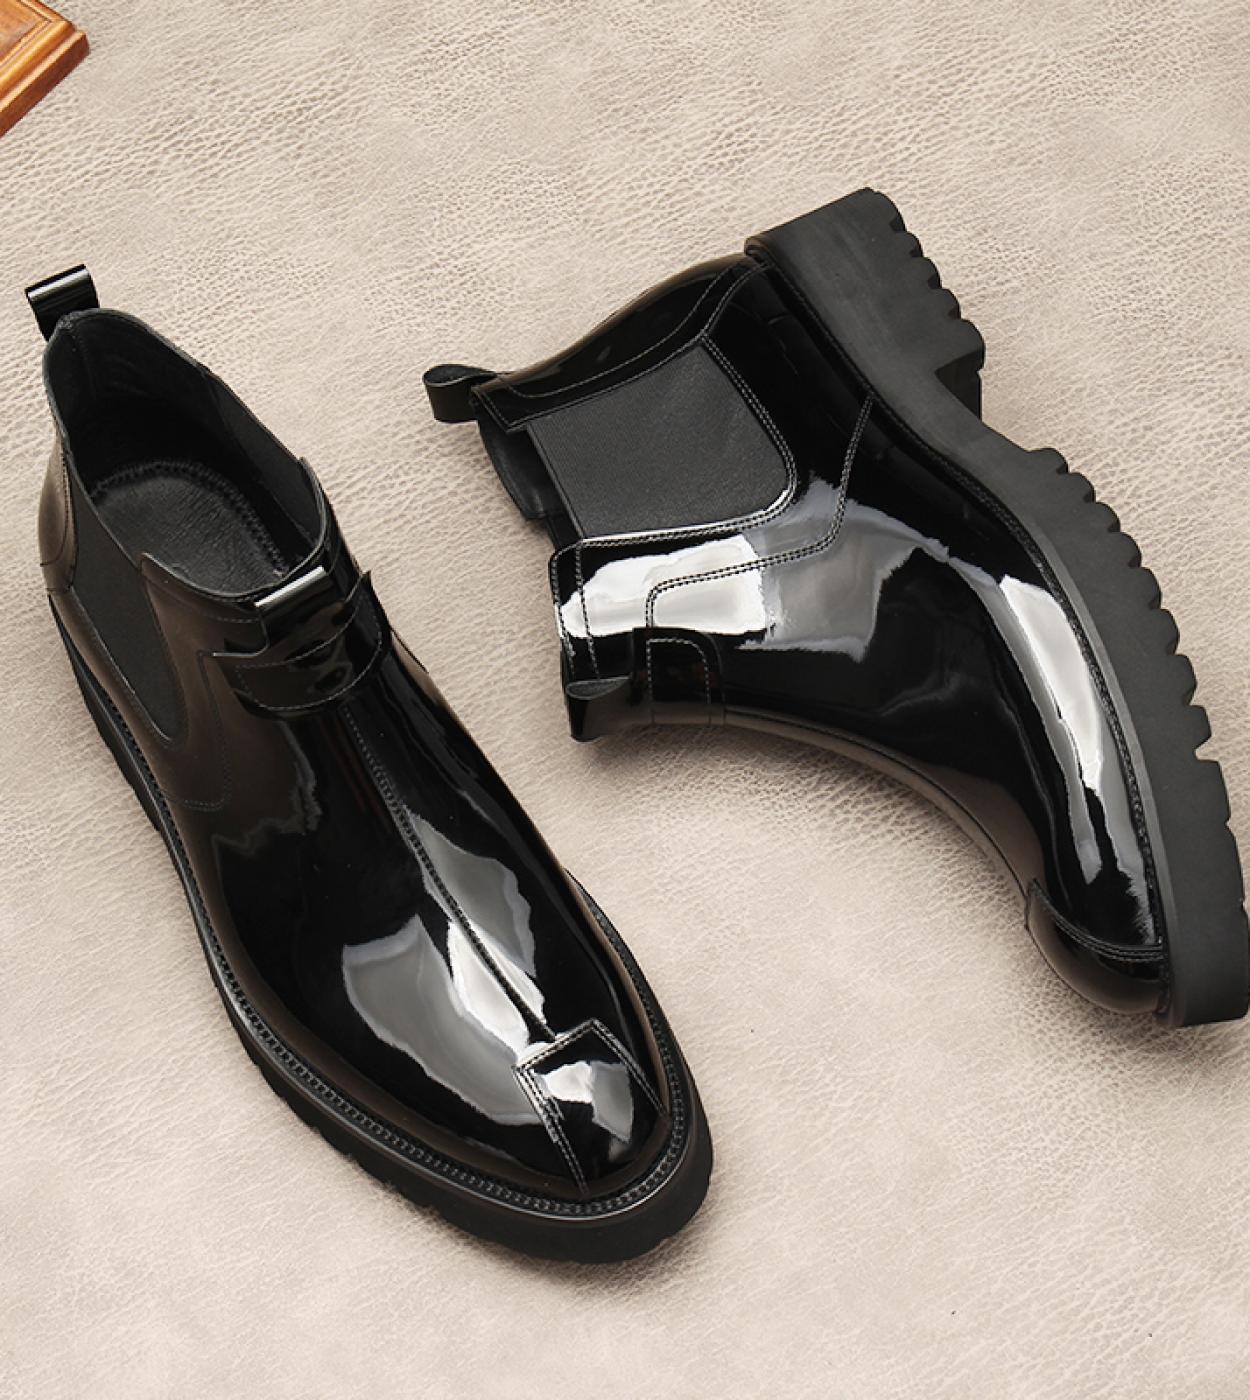 Luxury Patent Leather Mens Boots 2023 New Style Platform Slip On Black Ankle Warm Business Chelsea Boots Shoes Genuine L